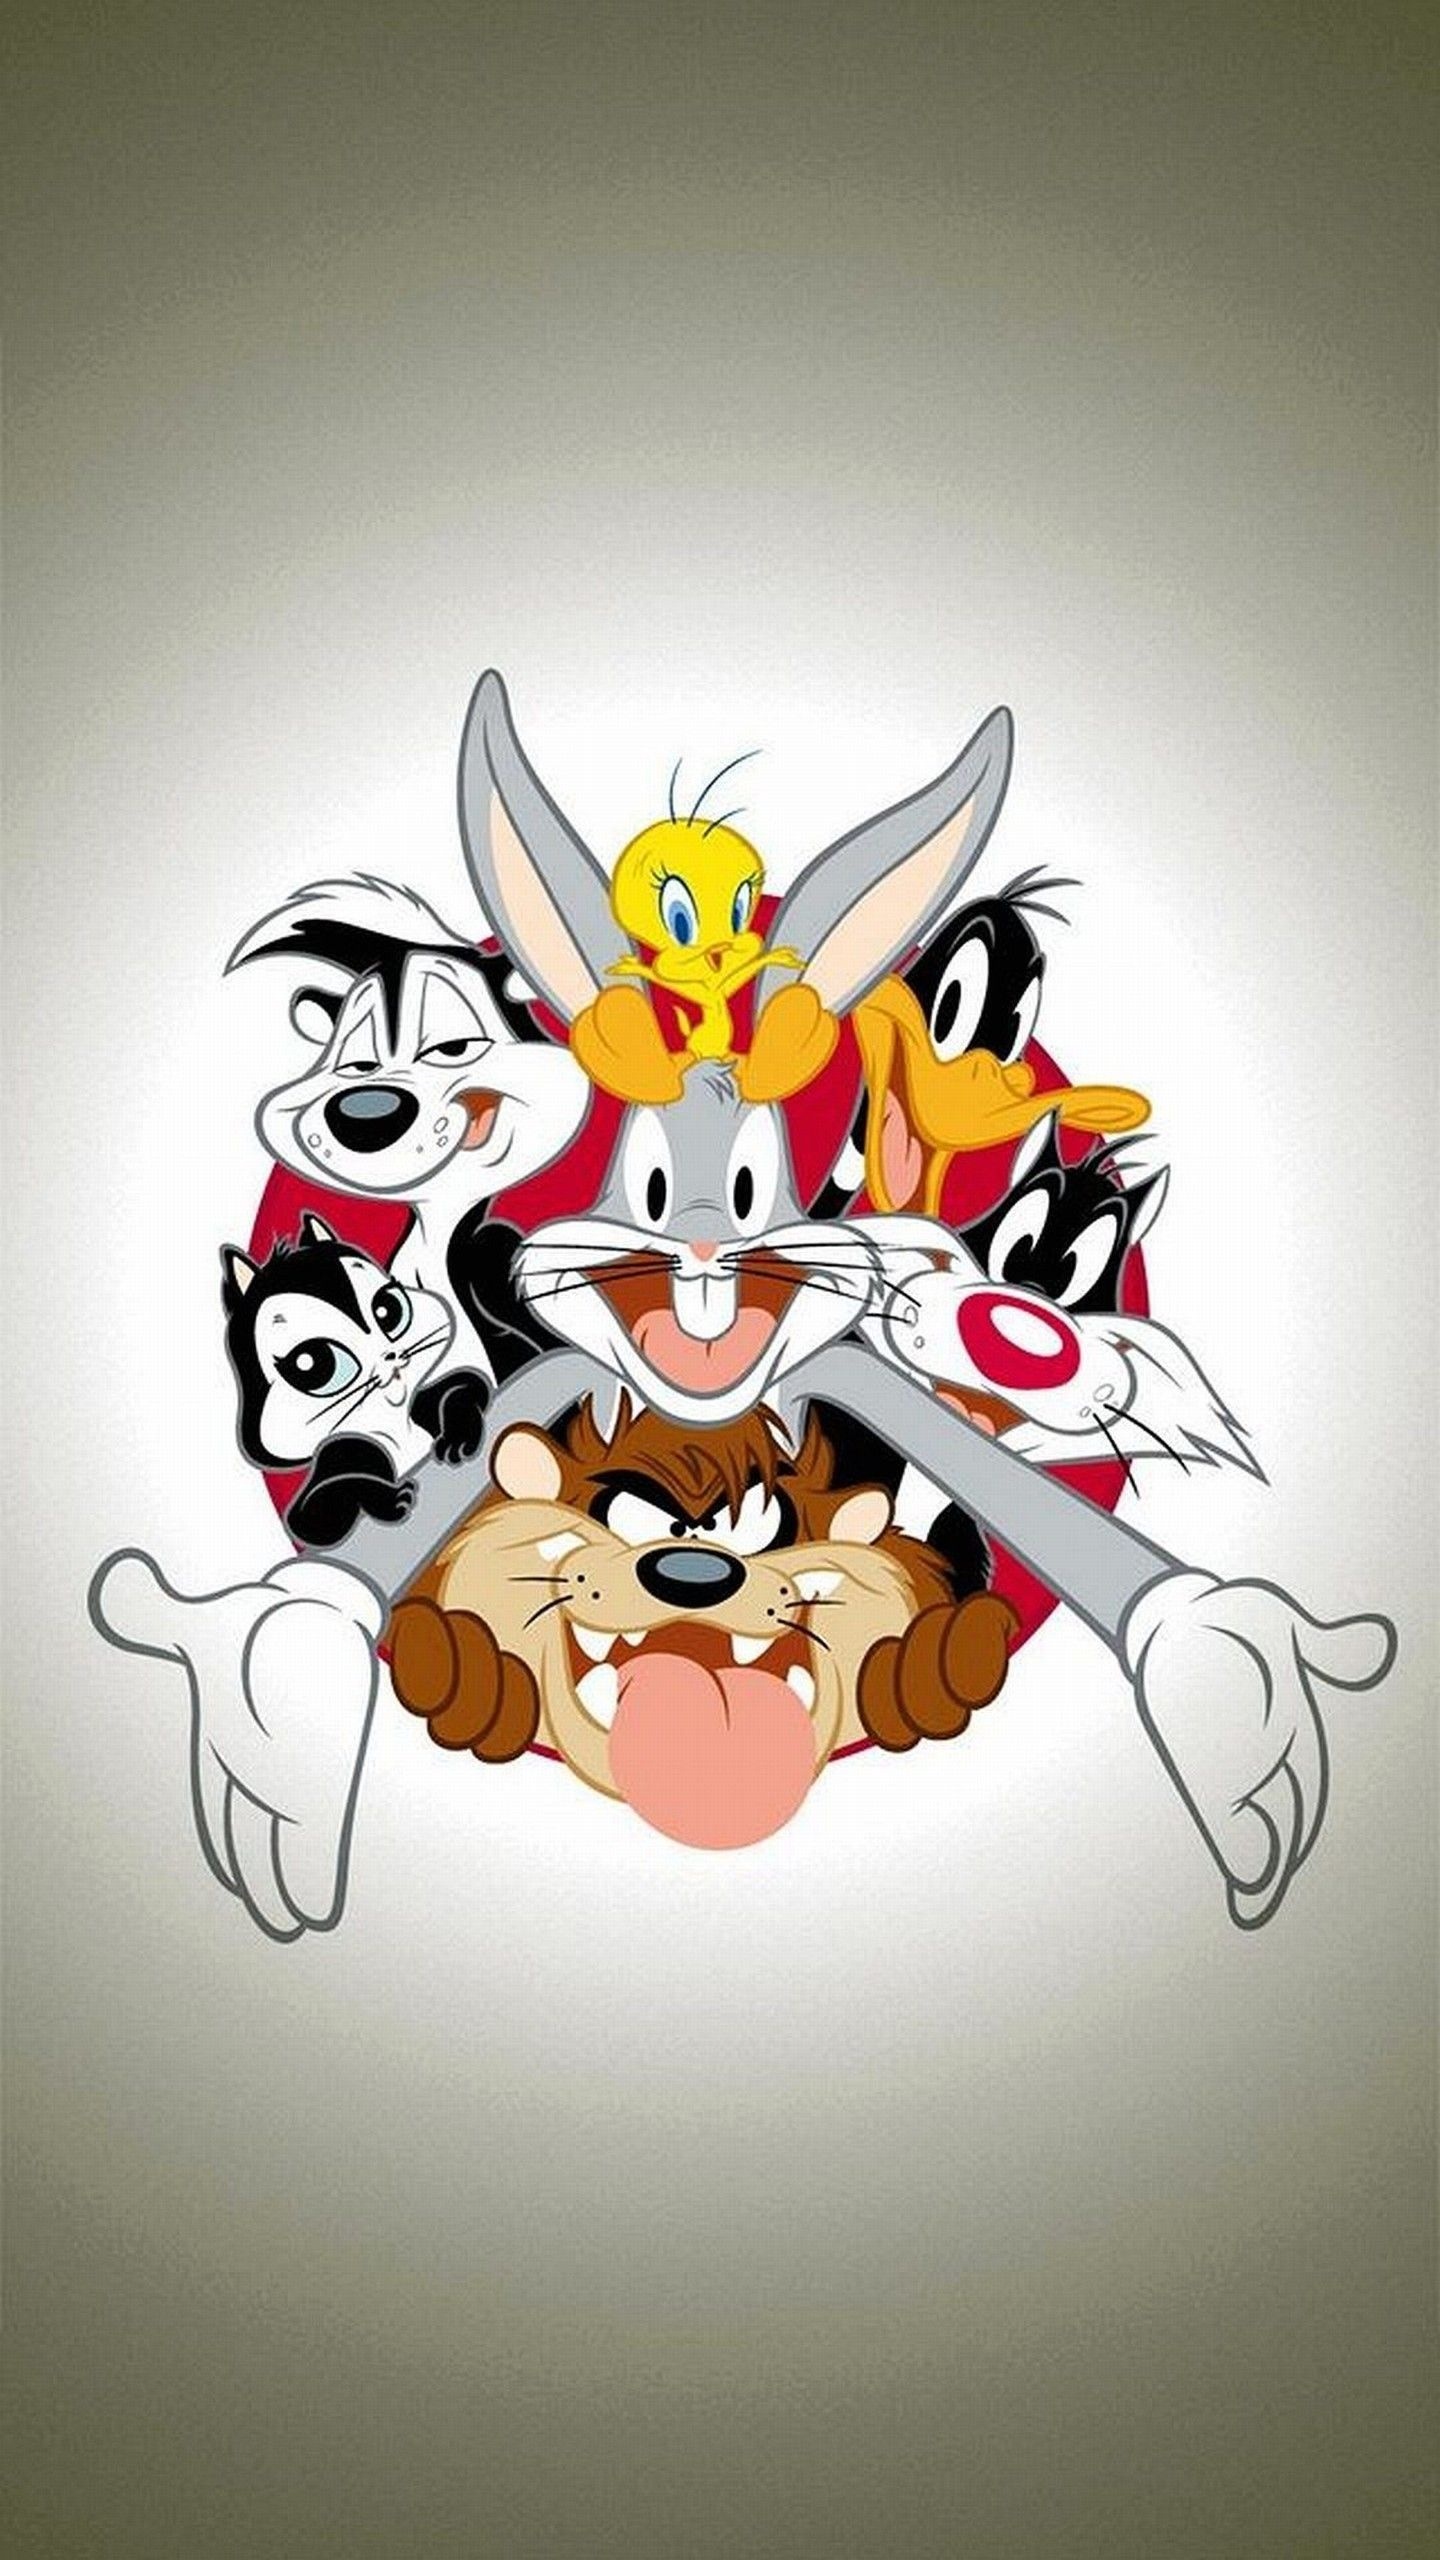 Looney Tunes iPhone wallpapers, Cartoon nostalgia, Phone backgrounds, Classic characters, 1440x2560 HD Handy